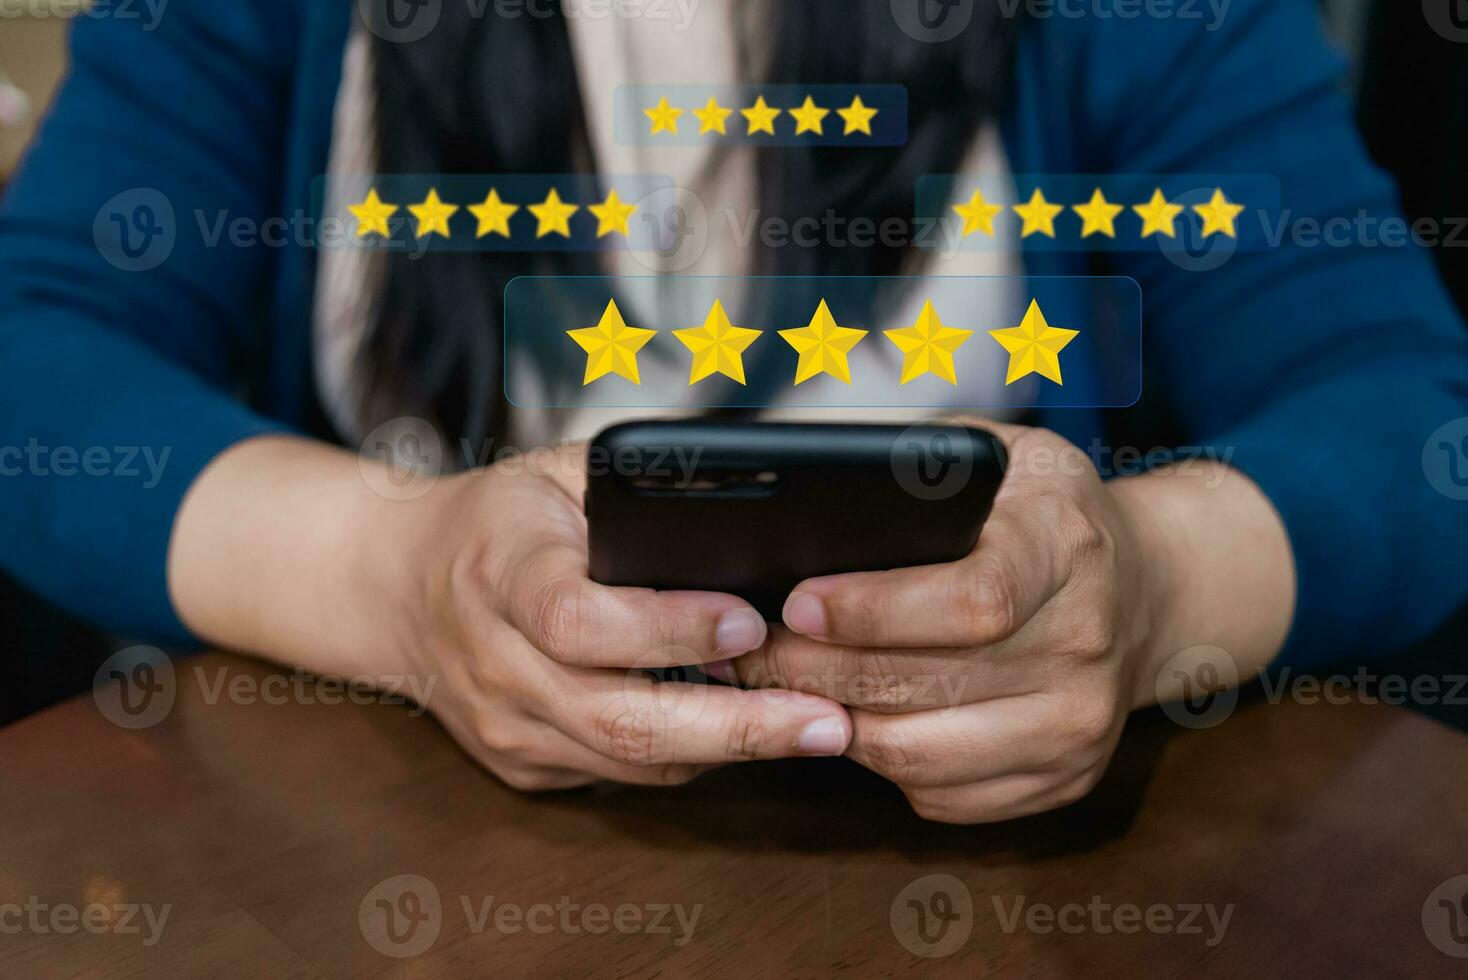 Businesses customer satisfaction surveys where customers can touch icon to rate their service experience with 5 stars. Client evaluate quality of service reputation ranking of business. photo